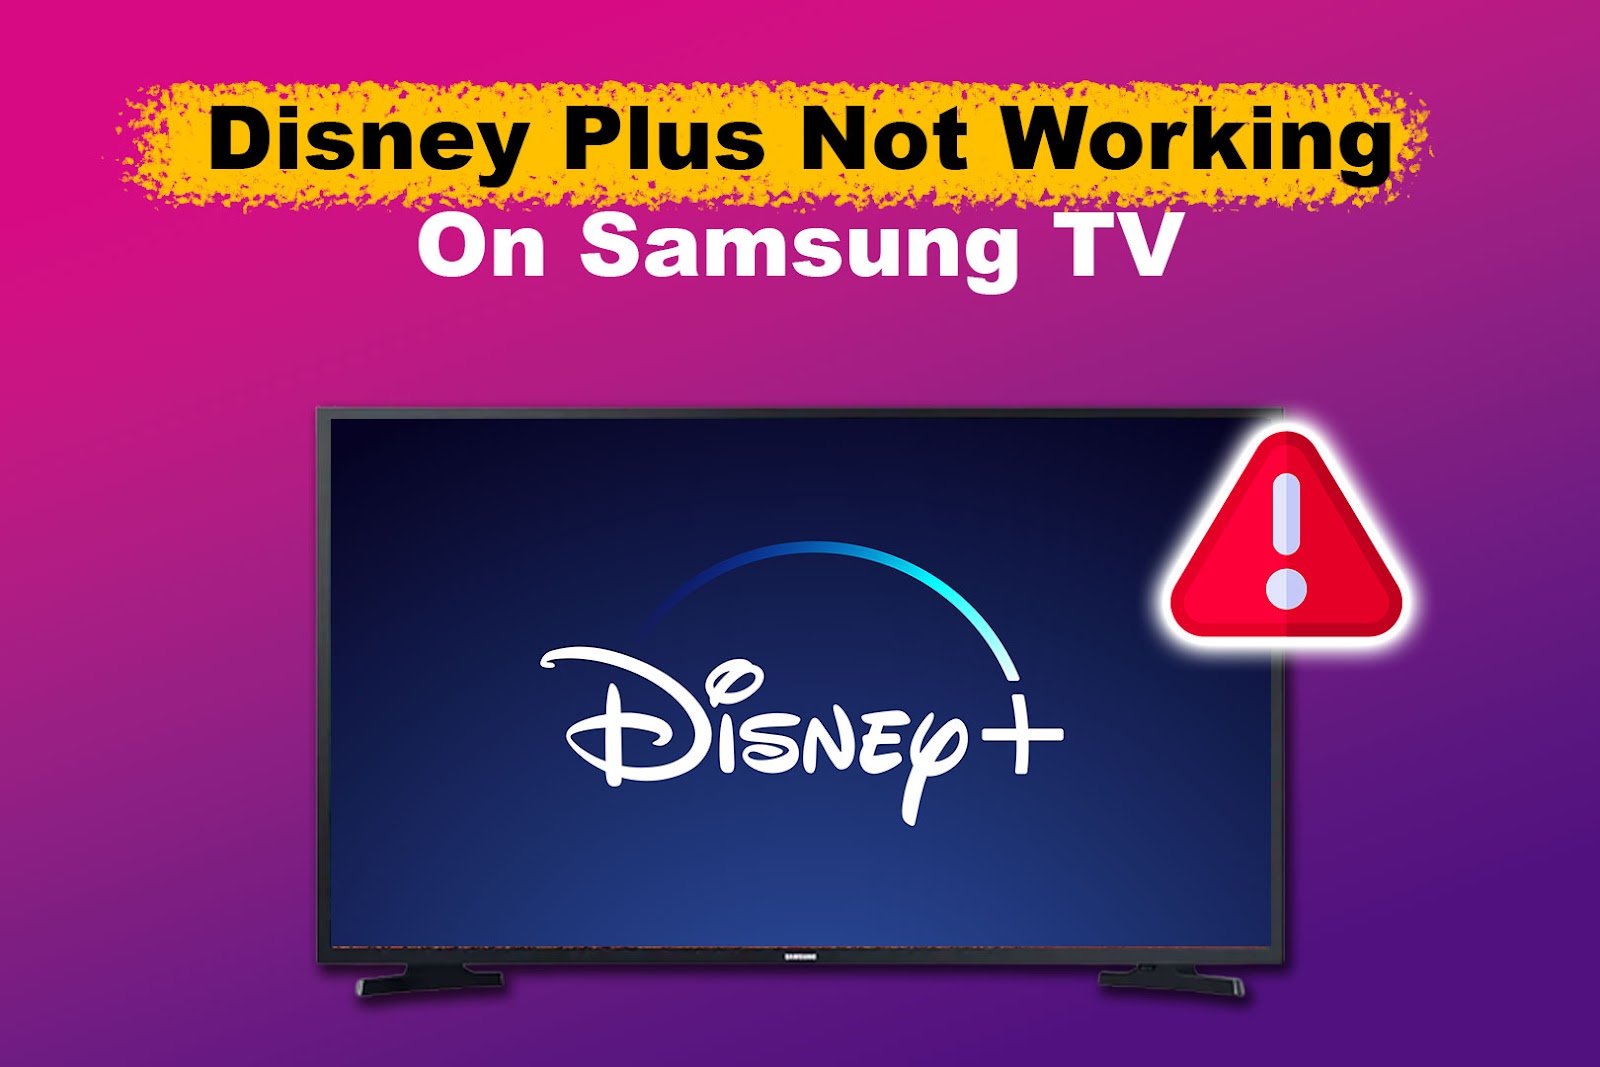 Disney Plus Not Working on Samsung TV [✓ Solution Revealed]